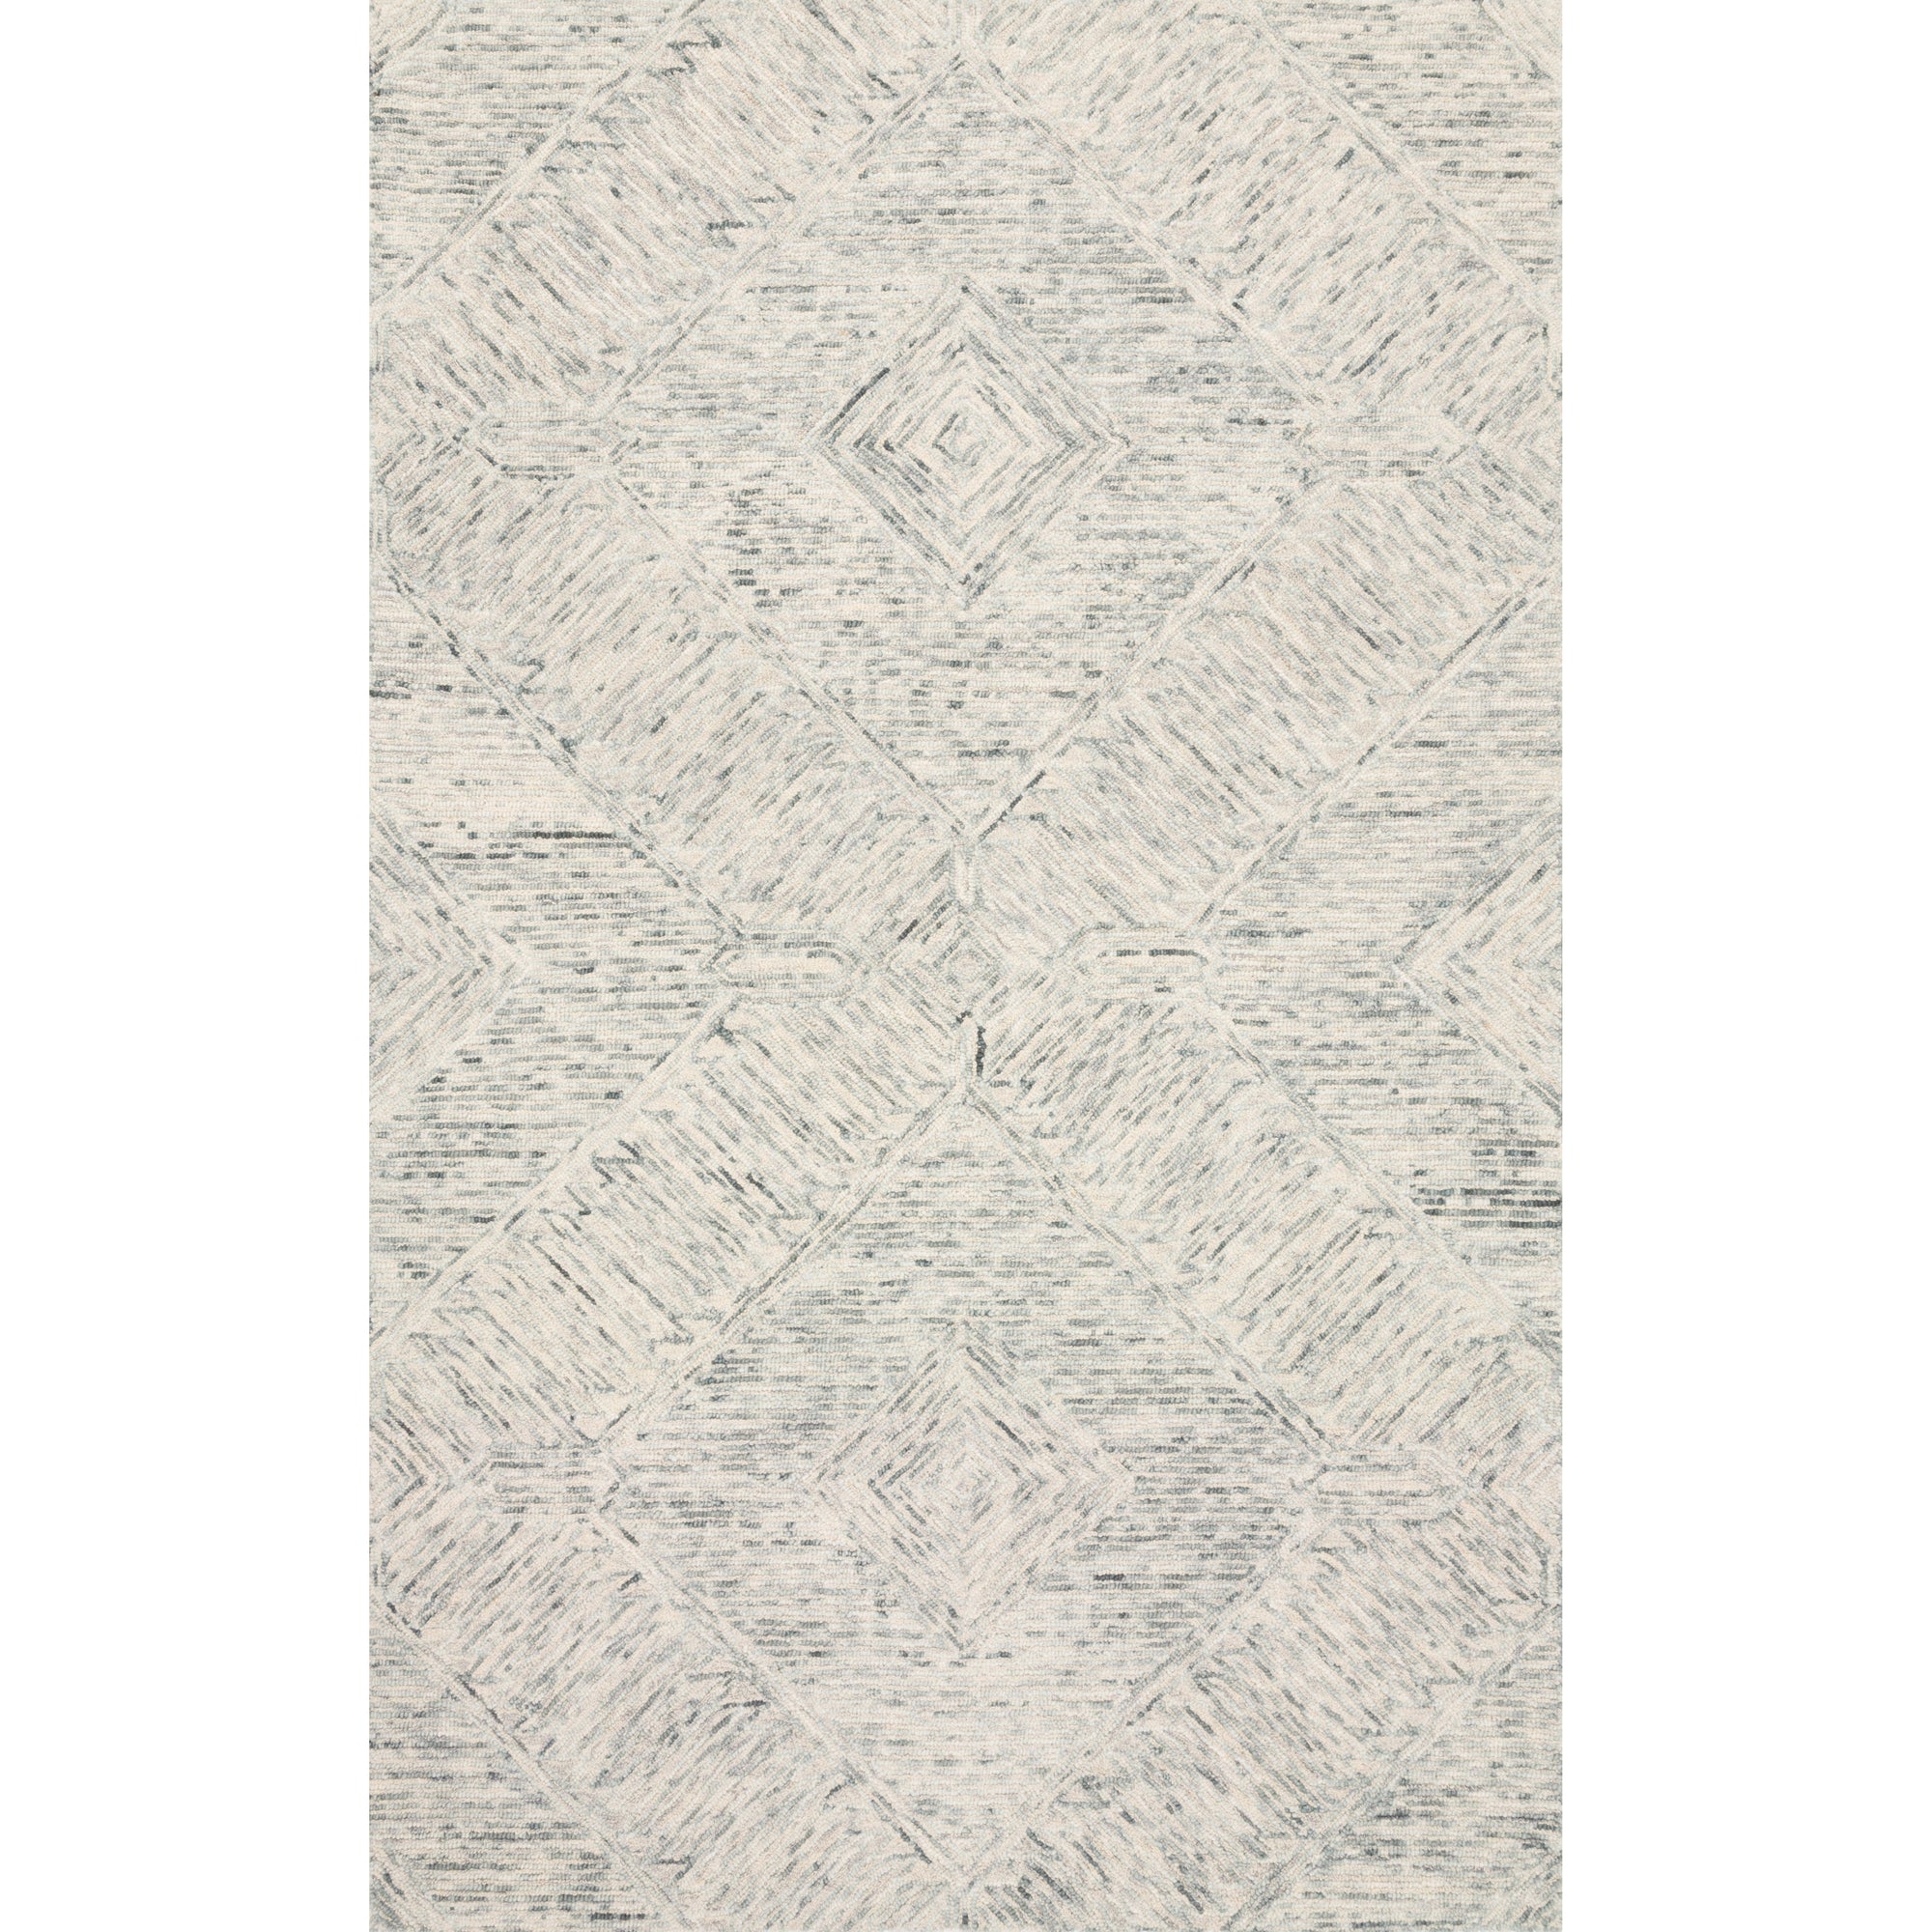 Rugs by Roo Loloi Ziva Sky Area Rug in size 18" x 18" Sample